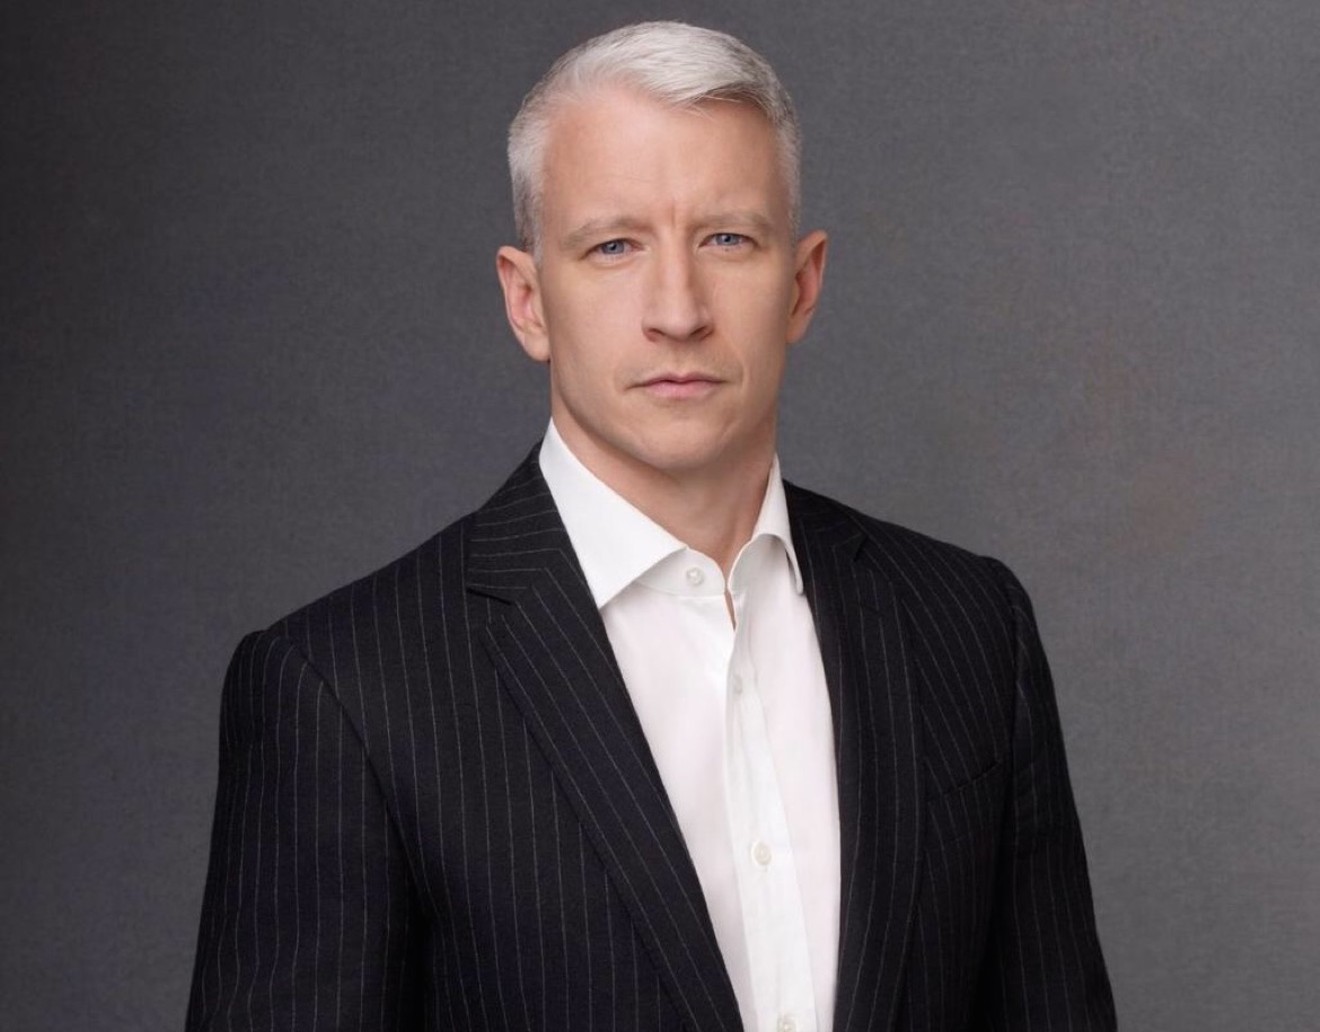 Anderson Cooper and Andy Cohen bring their AC2 show to Phoenix on June 9.